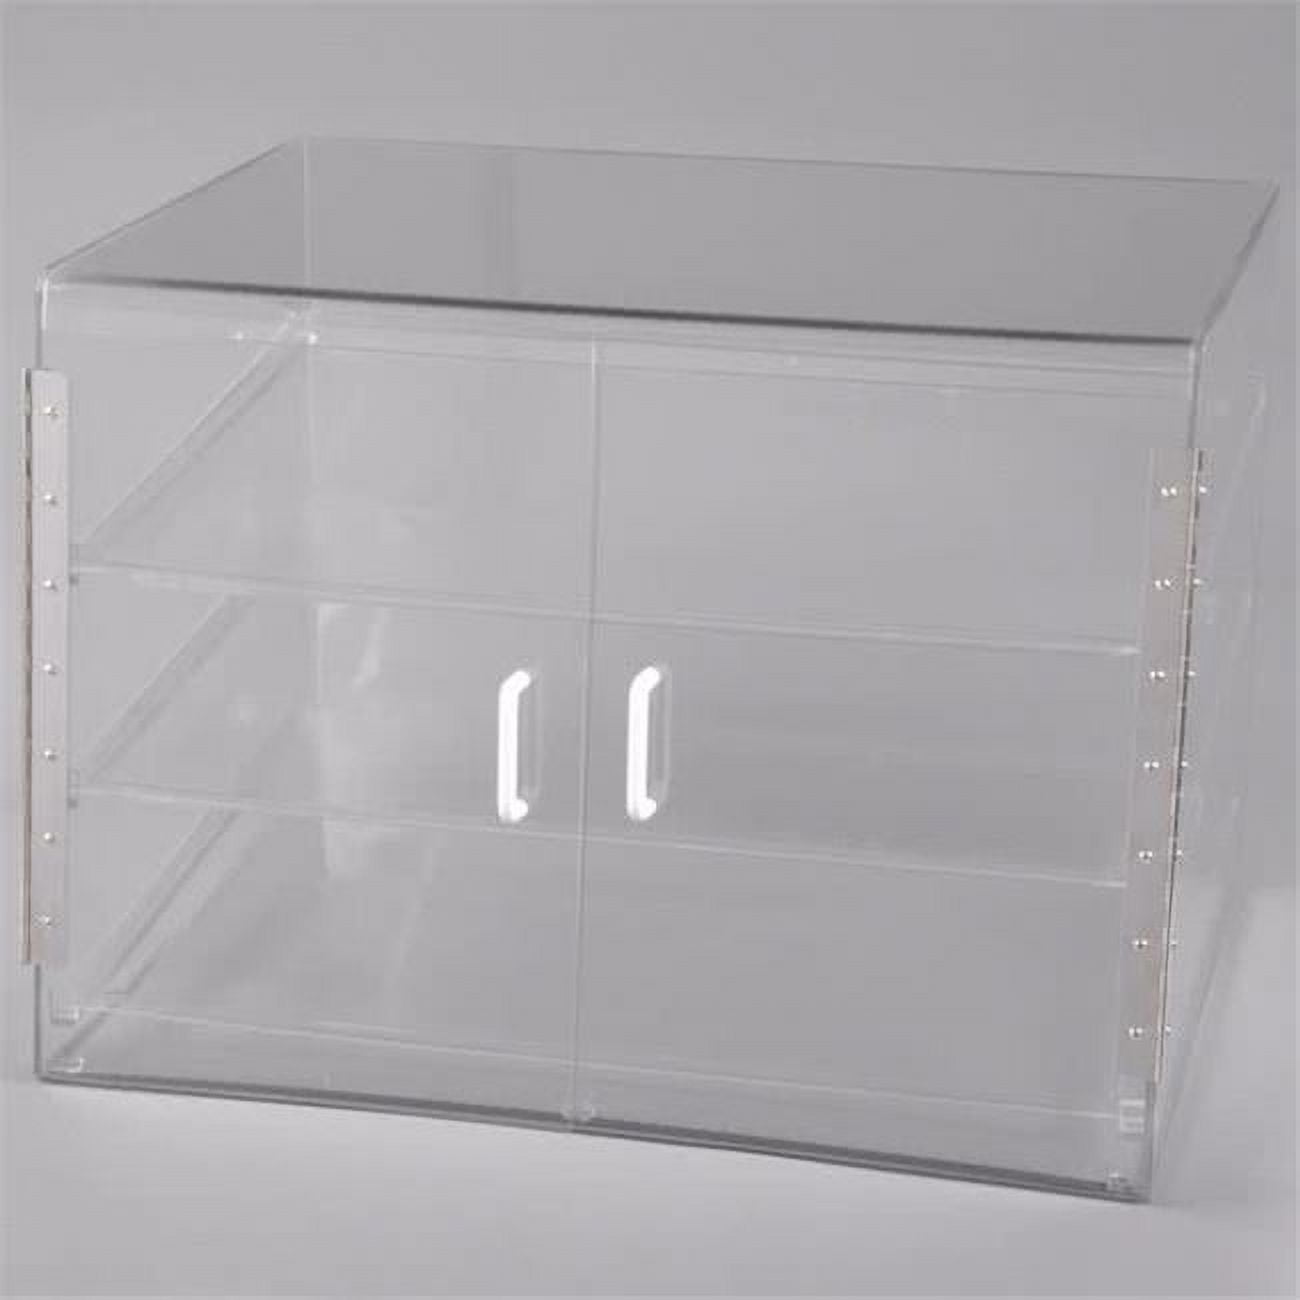 1202-s 3 Tray Large Economy Case - Clear